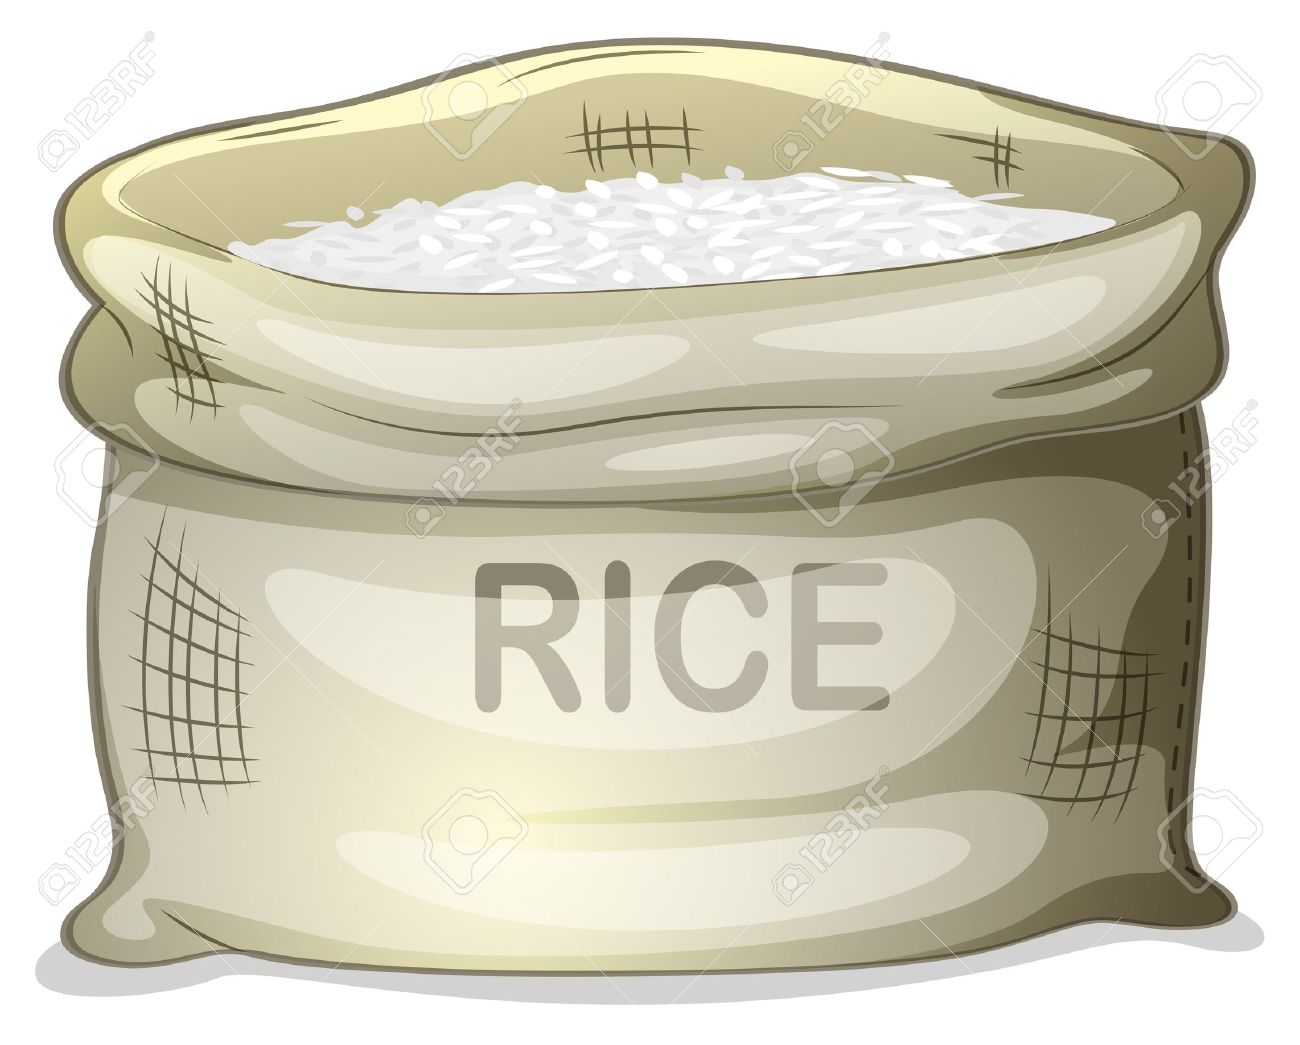 18133994-Illustration-of-a-sack-of-white-rice-on-a-white-background-Stock-Vector.jpg